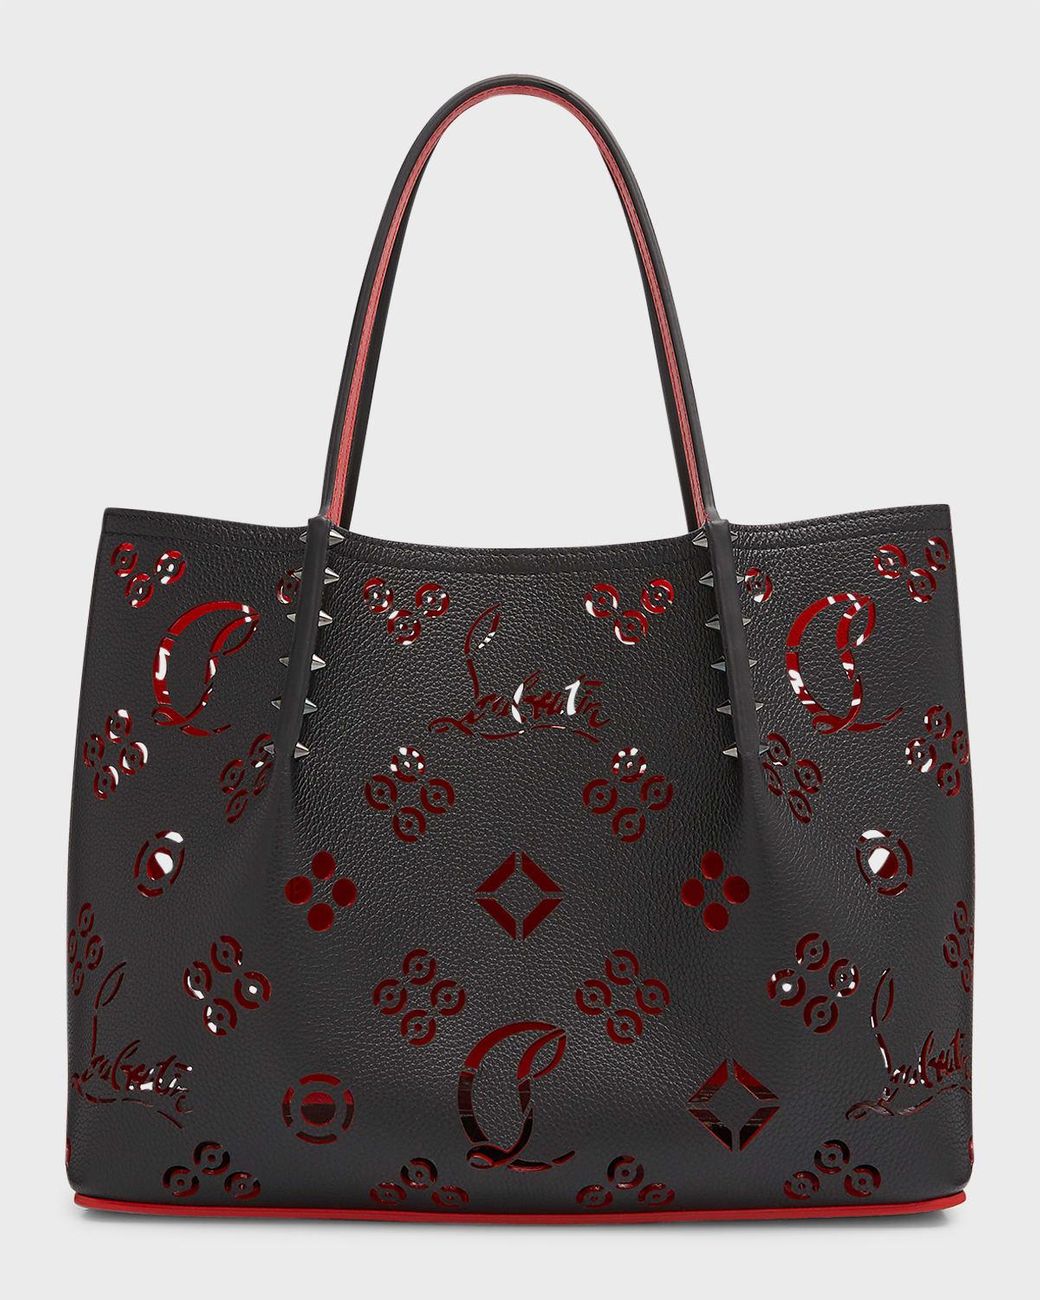 Christian Louboutin Cabarock Small Loubinthesky Perforated Tote Bag in ...